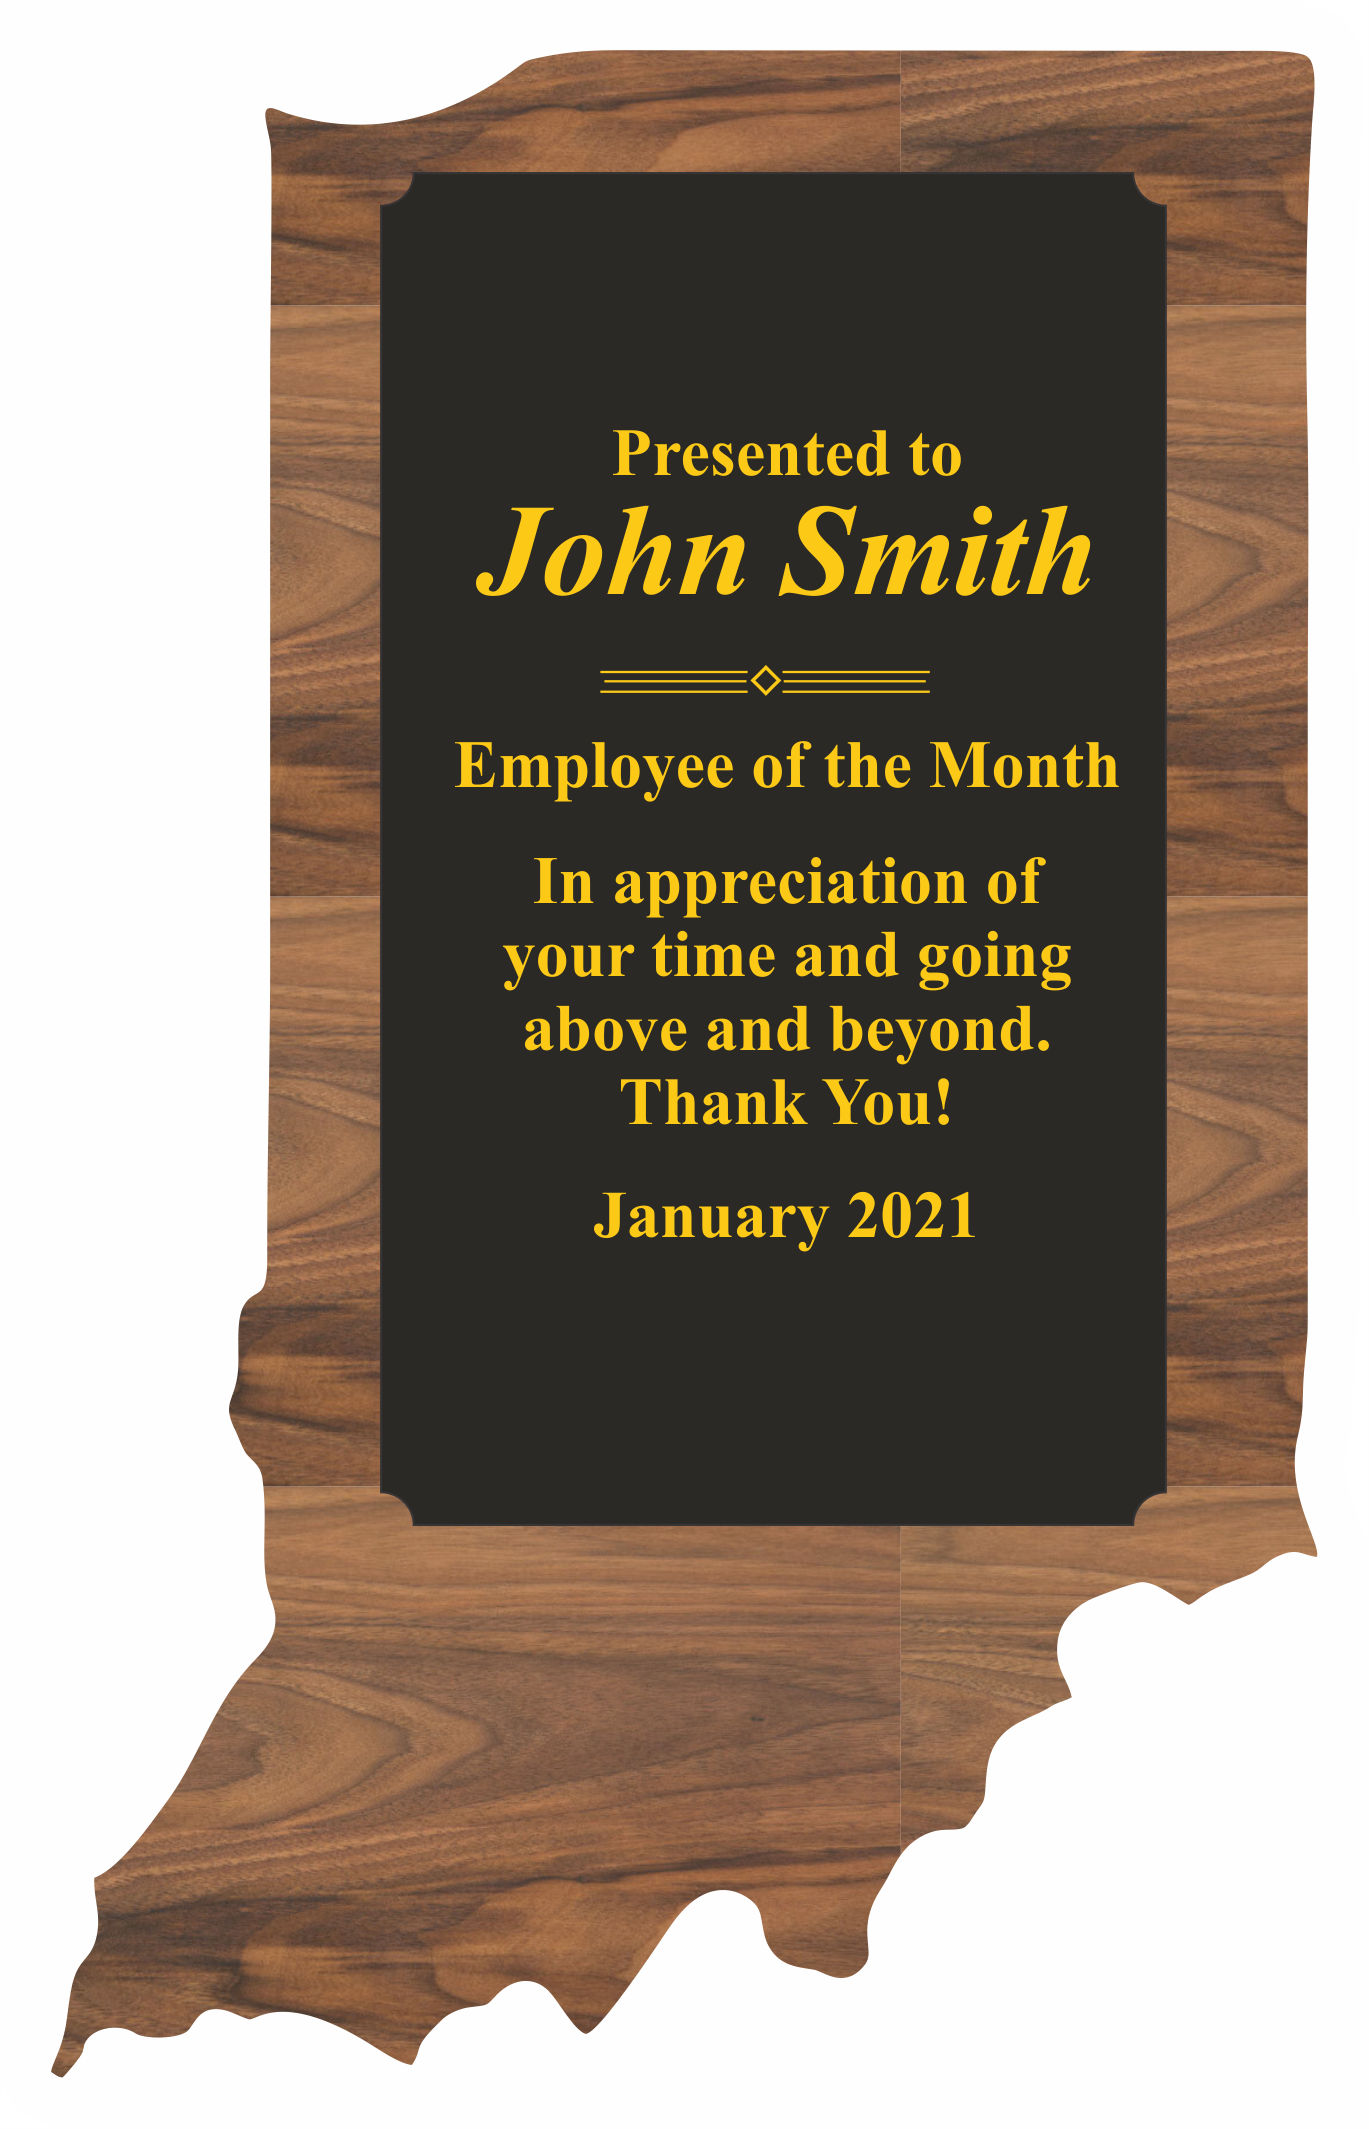 Custom Printed Indiana State Shaped Plaques